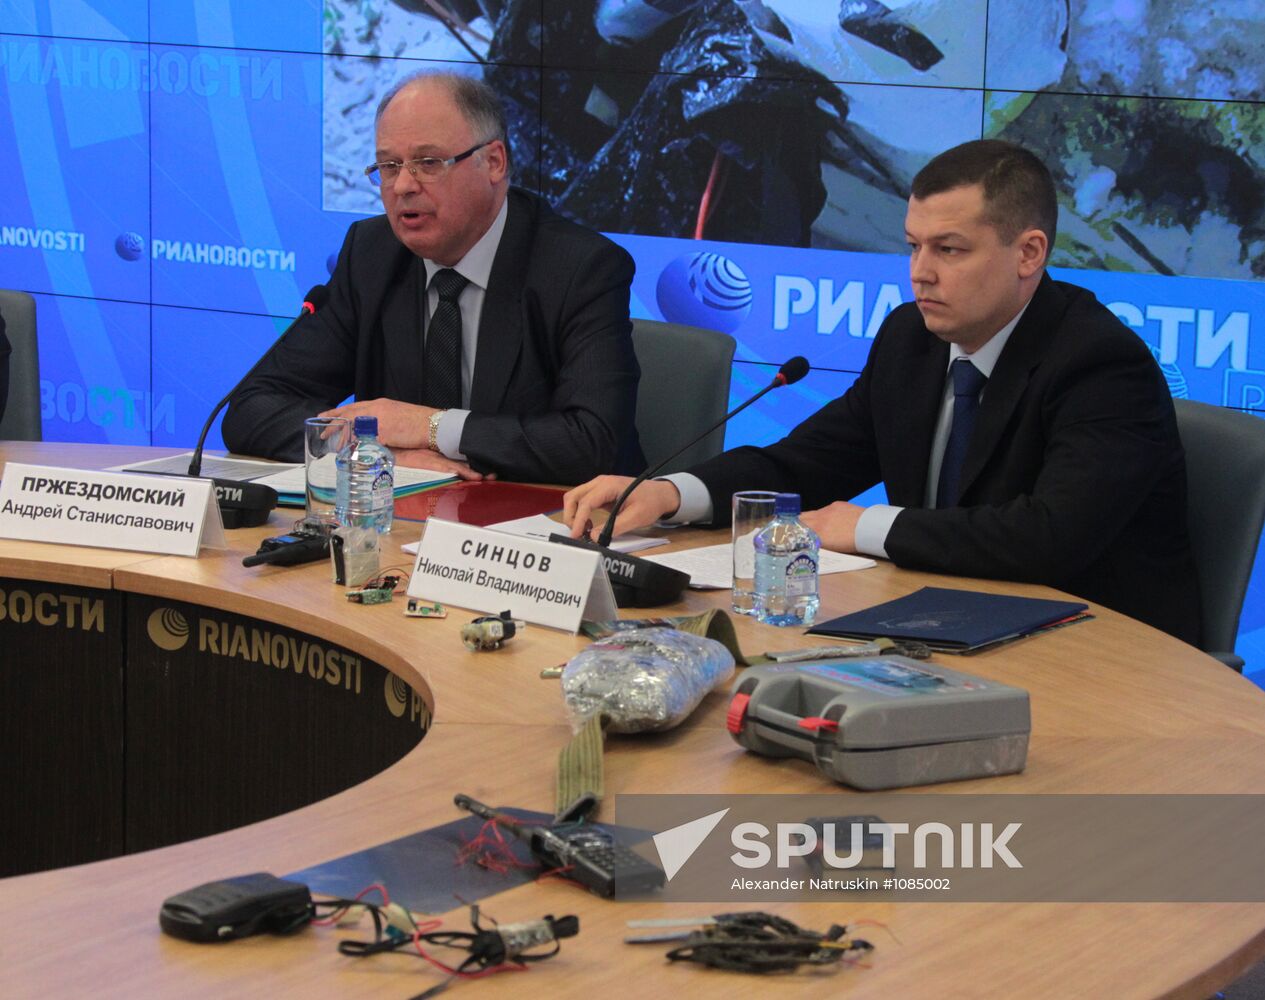 National Anti-Terror Committee's news conference